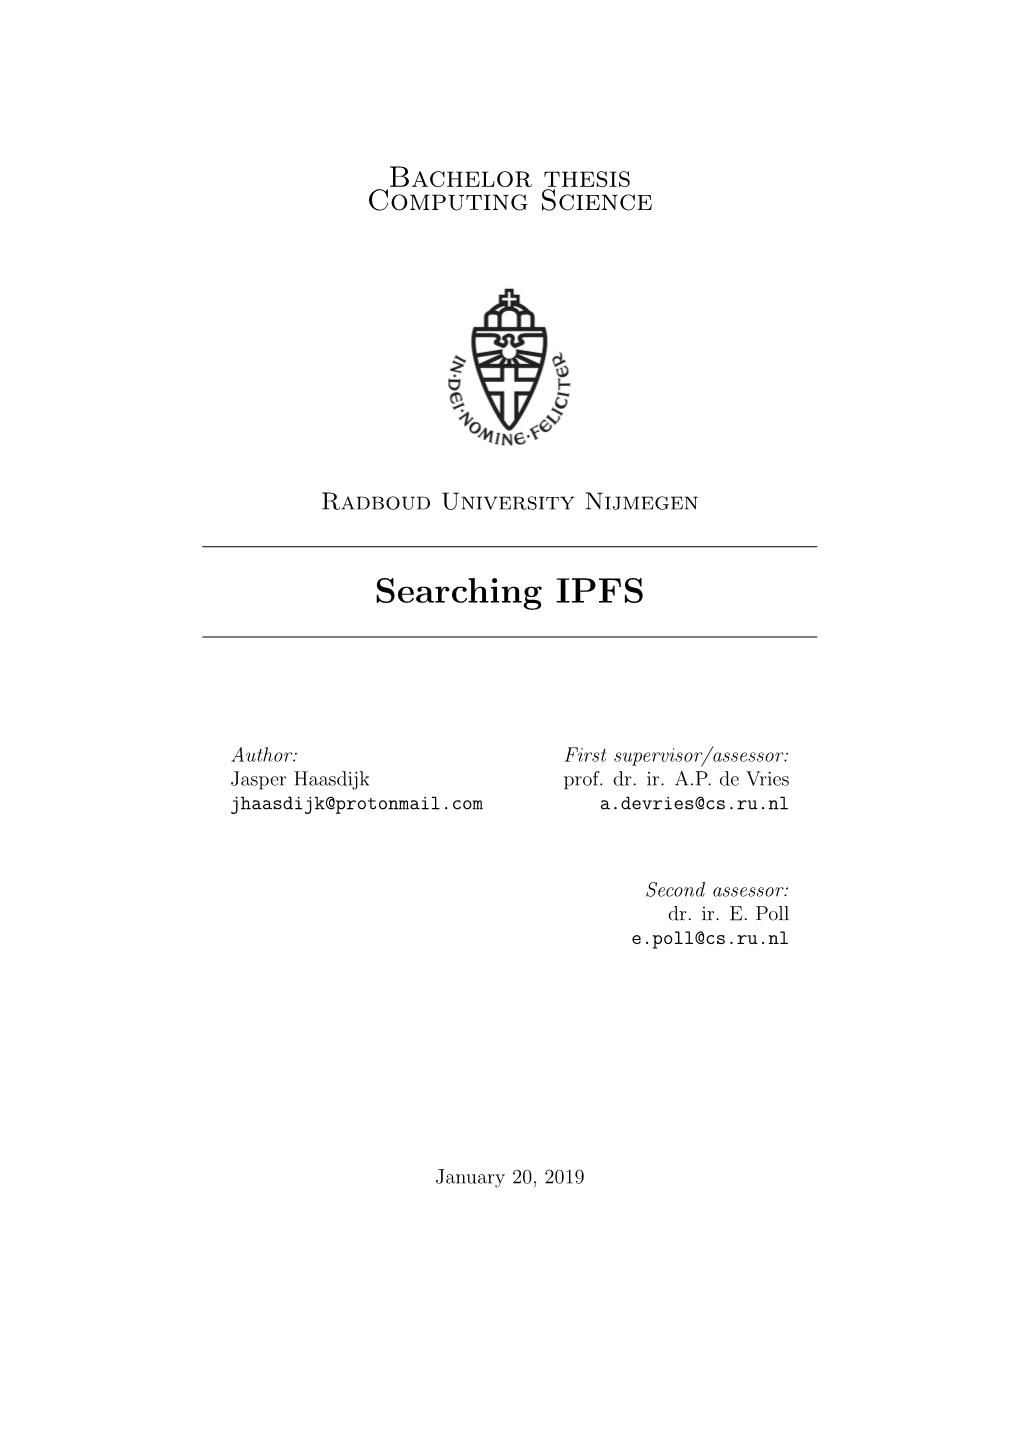 Searching IPFS